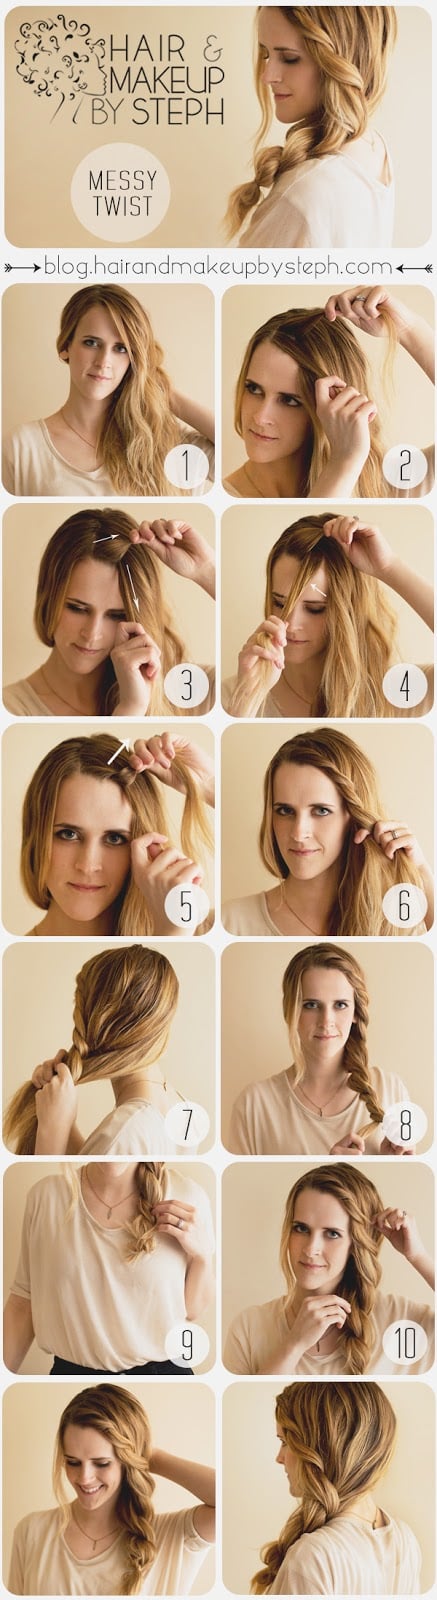 20 Cute and Easy Hairstyle Ideas and Tutorials (8)